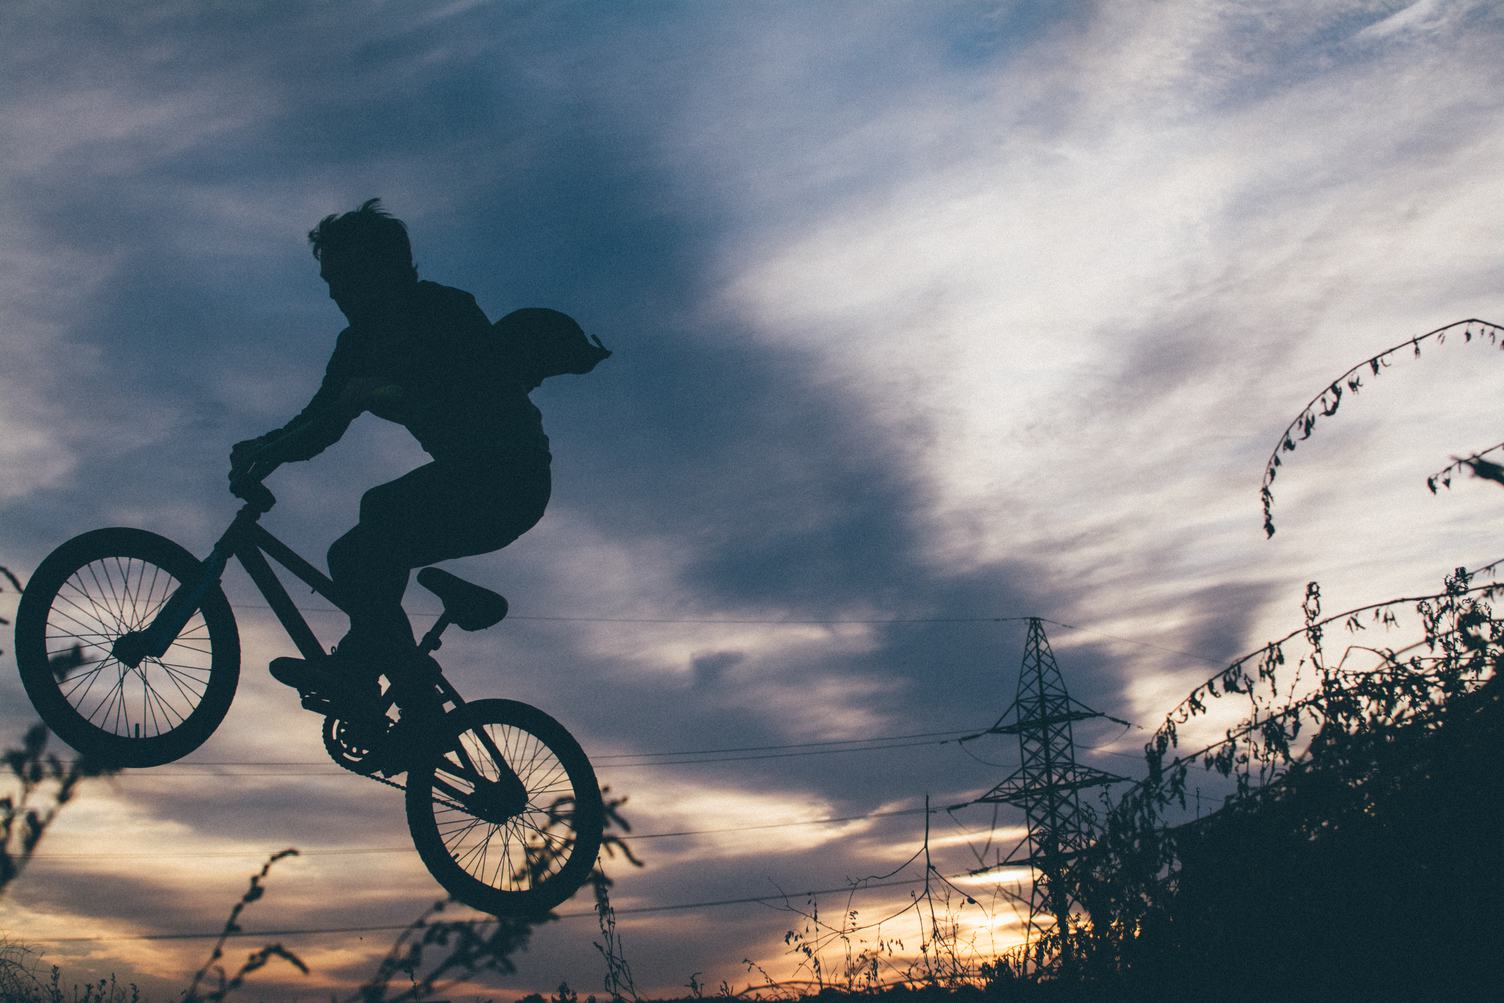 Silhouette of a Young Man Jumping on a Bike